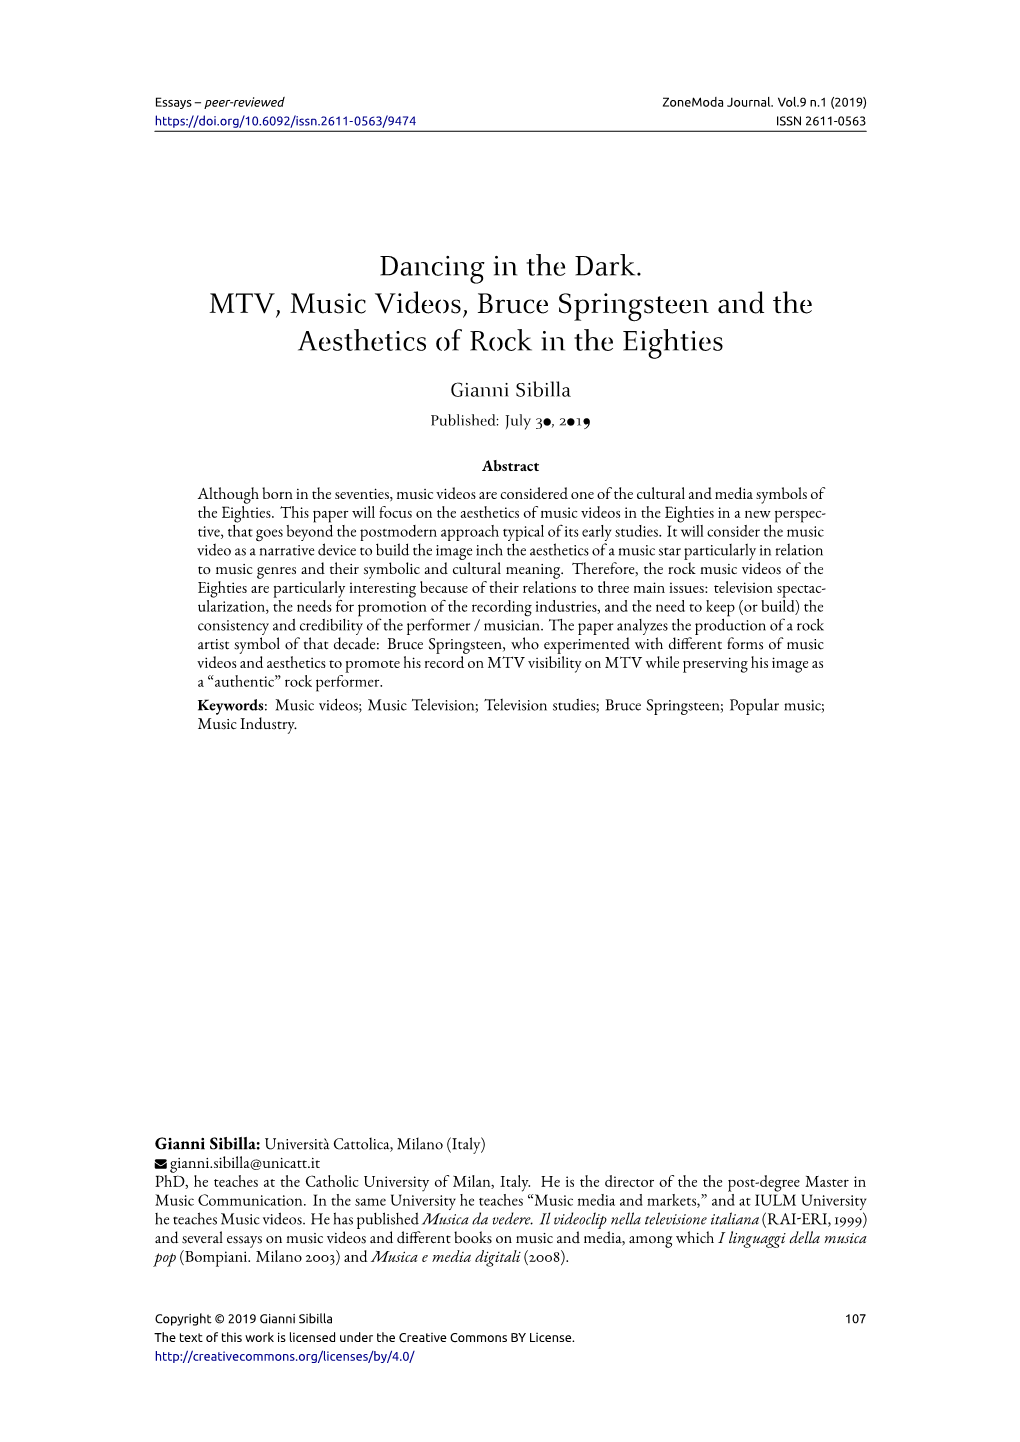 Dancing in the Dark. MTV, Music Videos, Bruce Springsteen and the Aesthetics of Rock in the Eighties